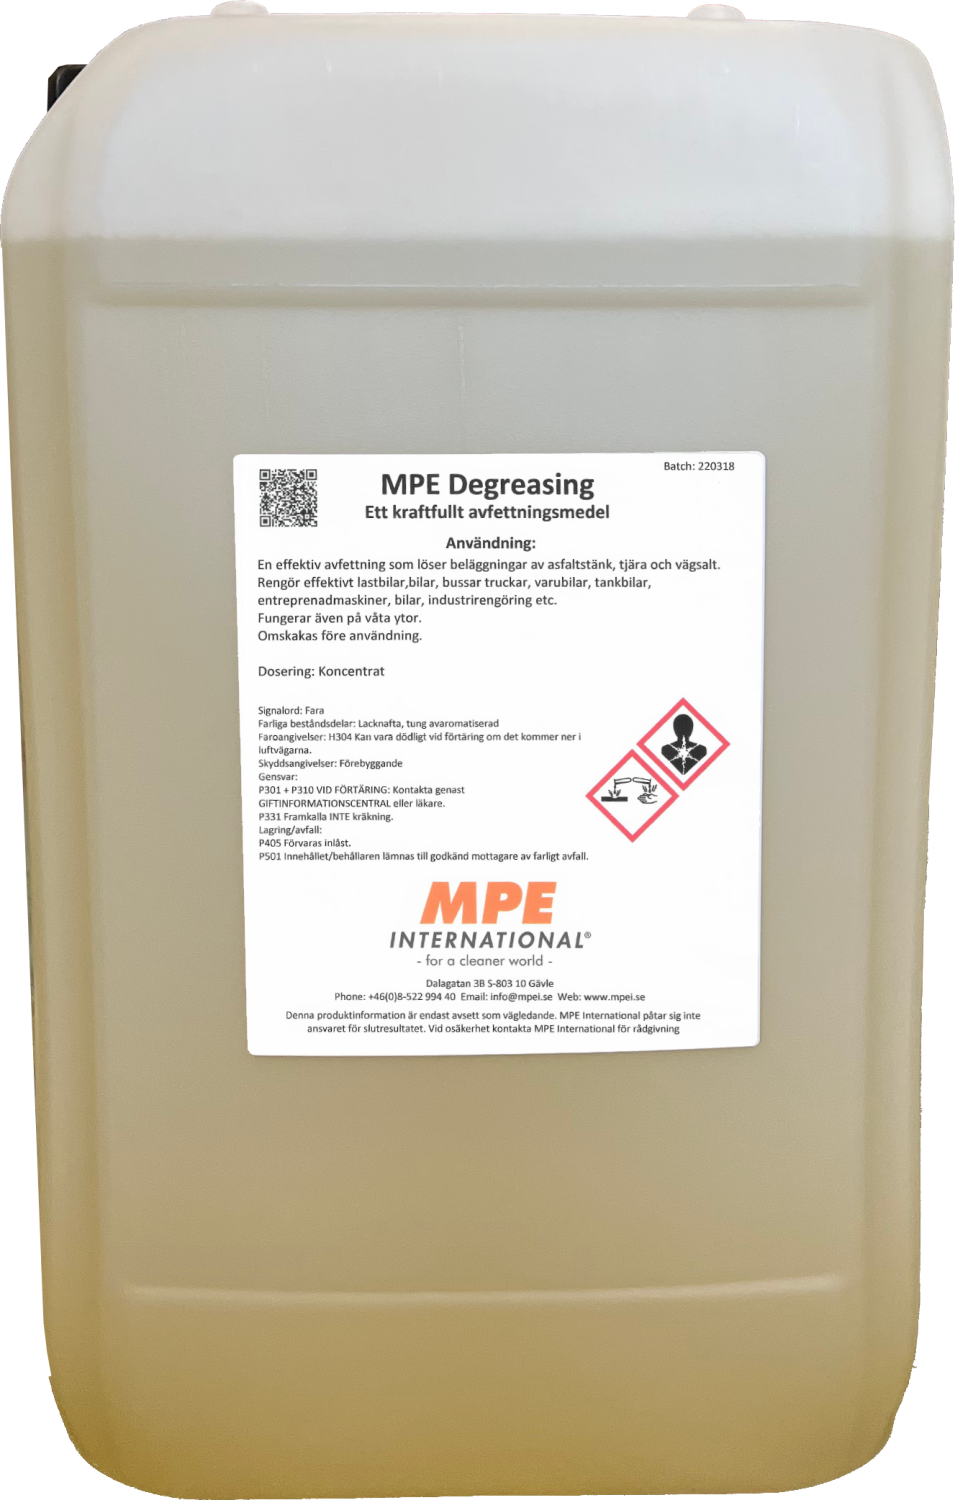 MPE Degreasing